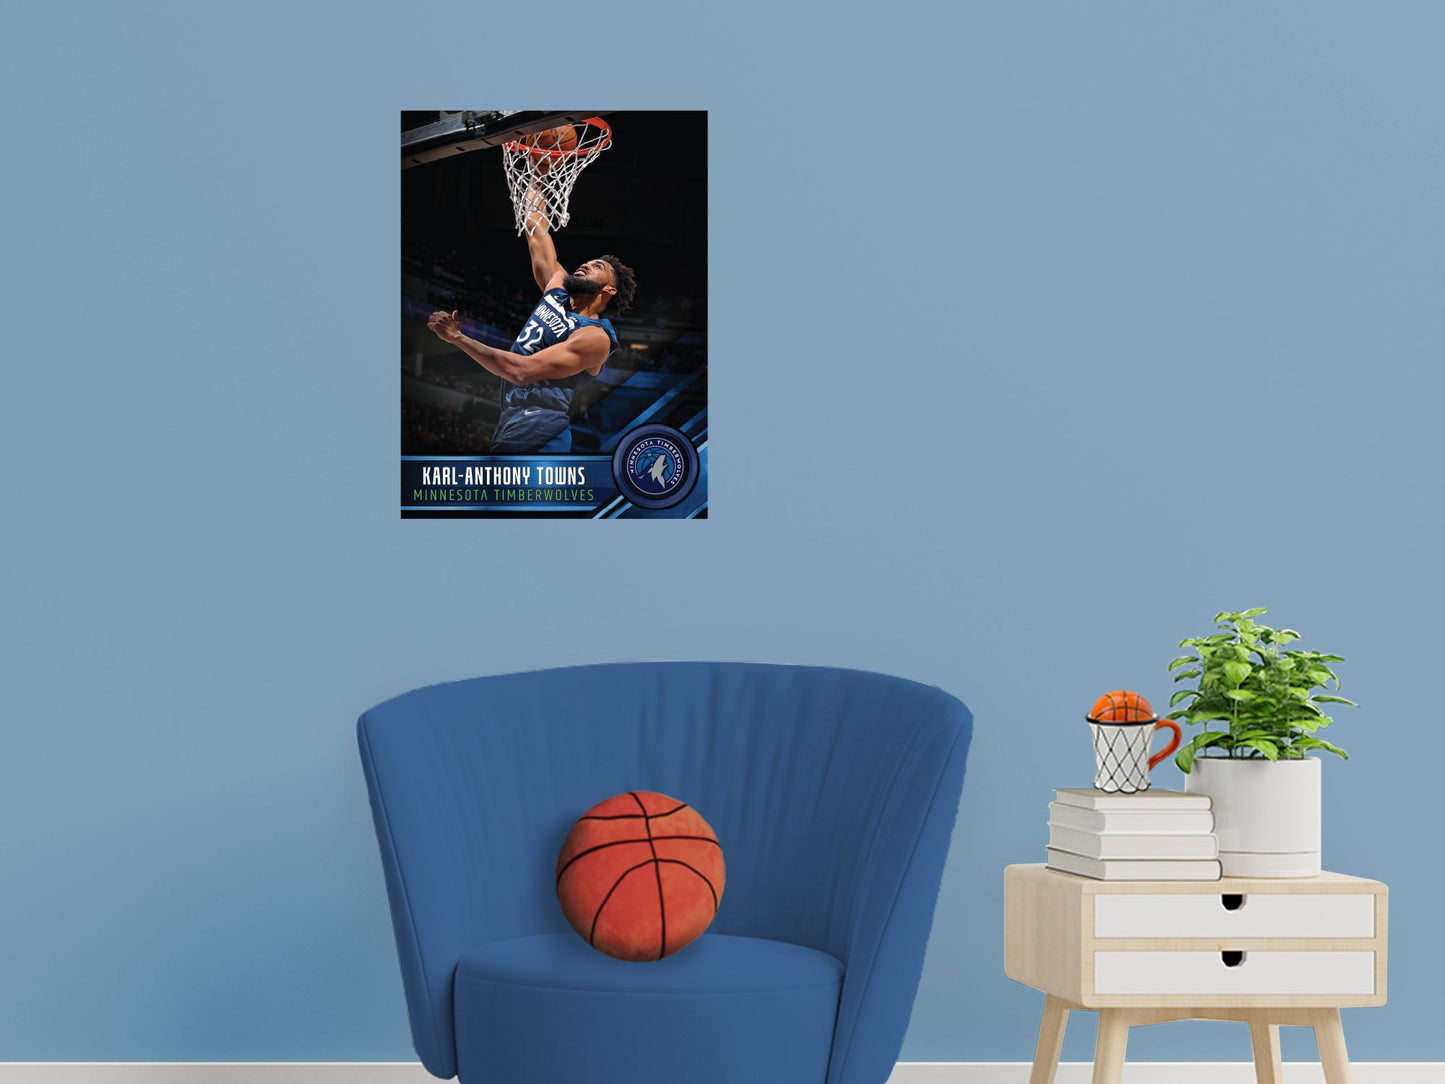 Minnesota Timberwolves: Karl-Anthony Towns Poster - Officially Licensed NBA Removable Adhesive Decal